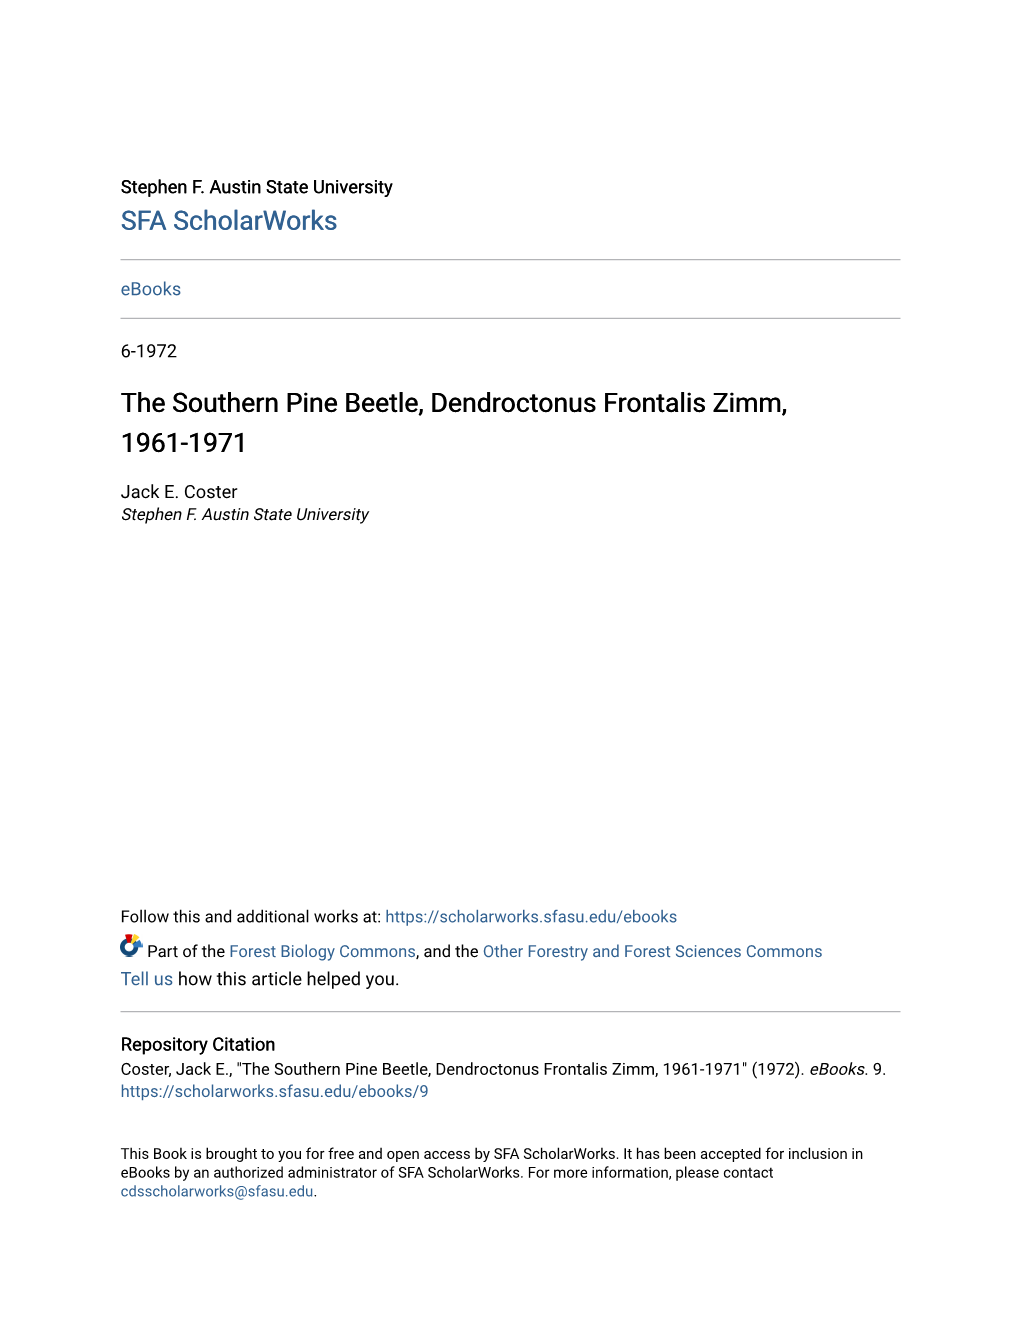 The Southern Pine Beetle, Dendroctonus Frontalis Zimm, 1961-1971